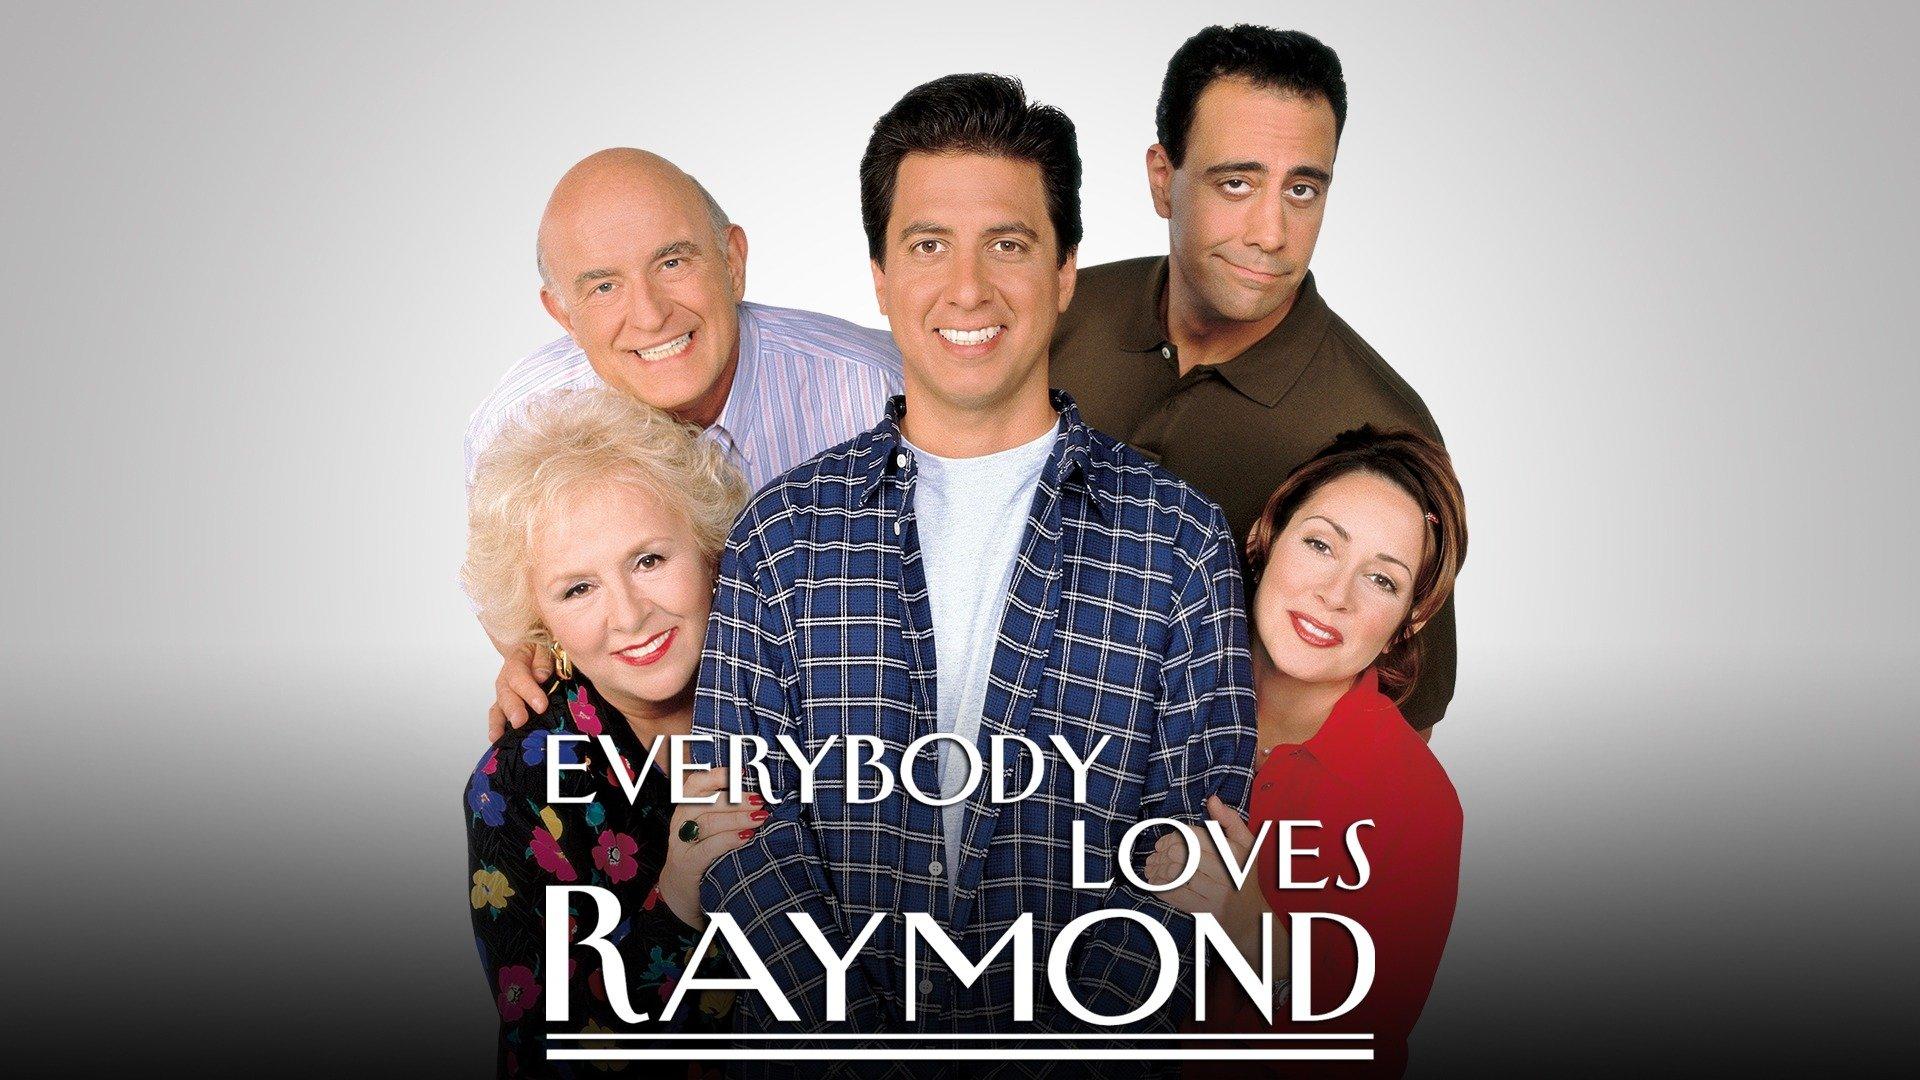 Everybody loves raymond just so you know meme